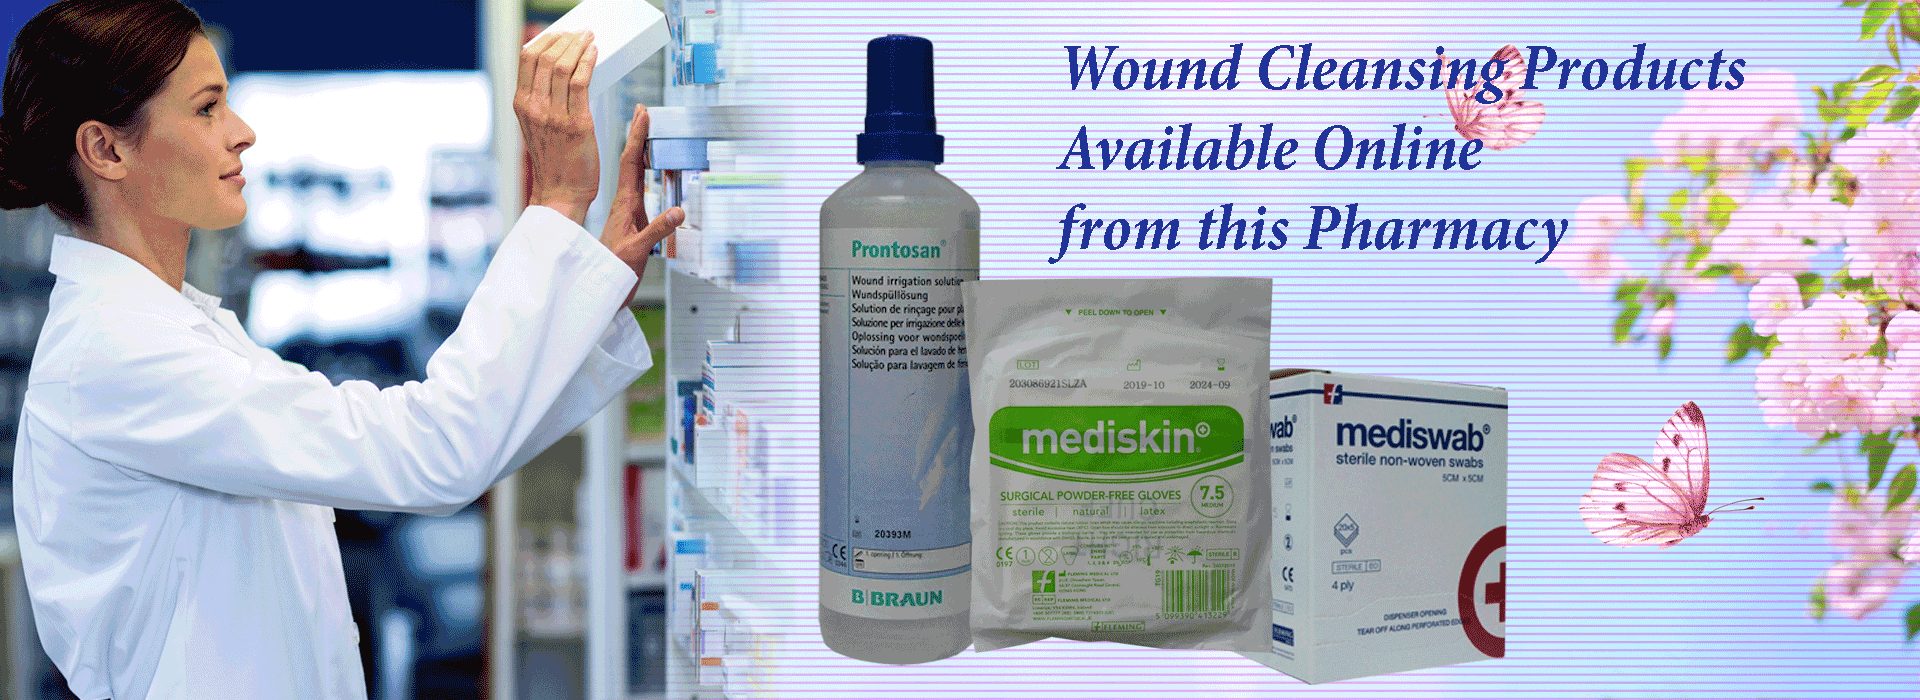 wounds dressings stocked here inadine granugel allevyn coban